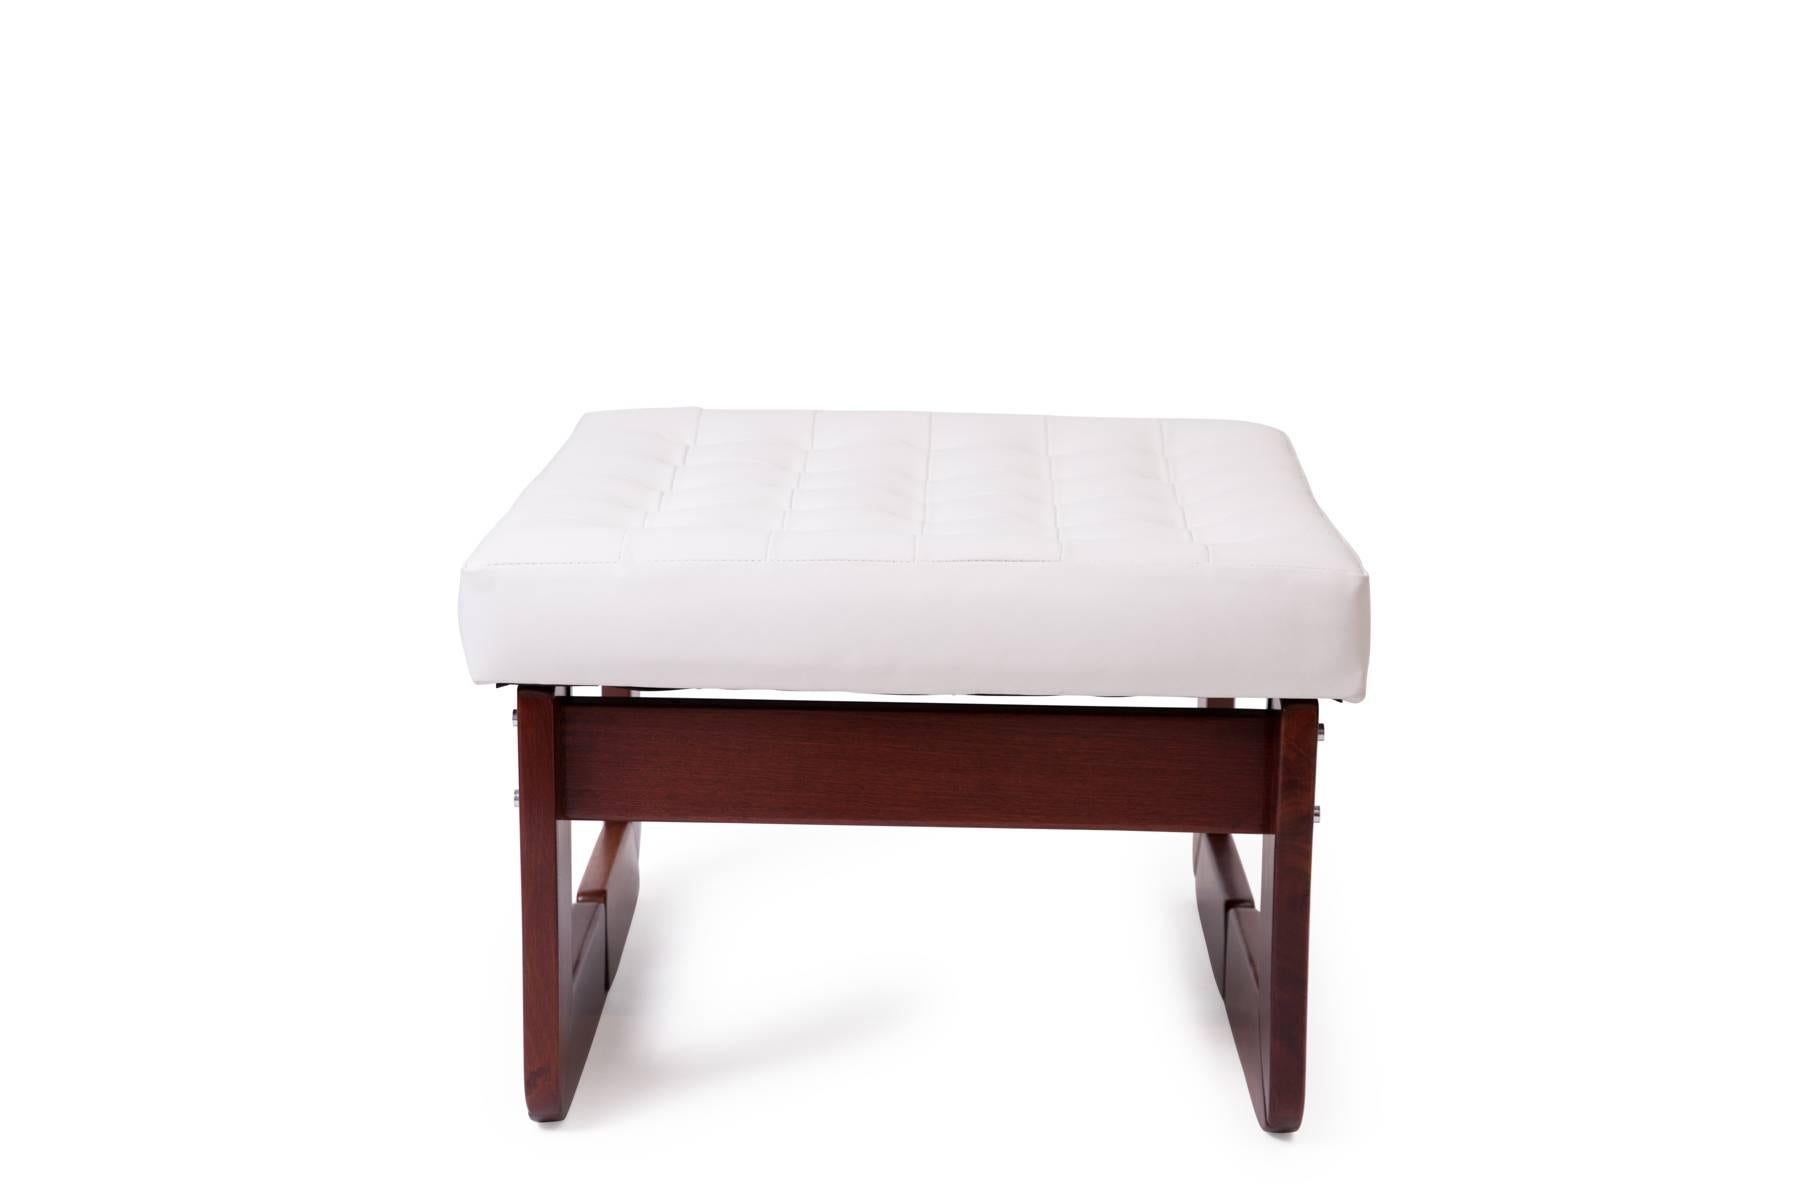 Pair of white tufted leather Percival Lafer solid rosewood and upholstered ottomans, circa early 1970s. These examples have been newly upholstered Price listed is for the pair.